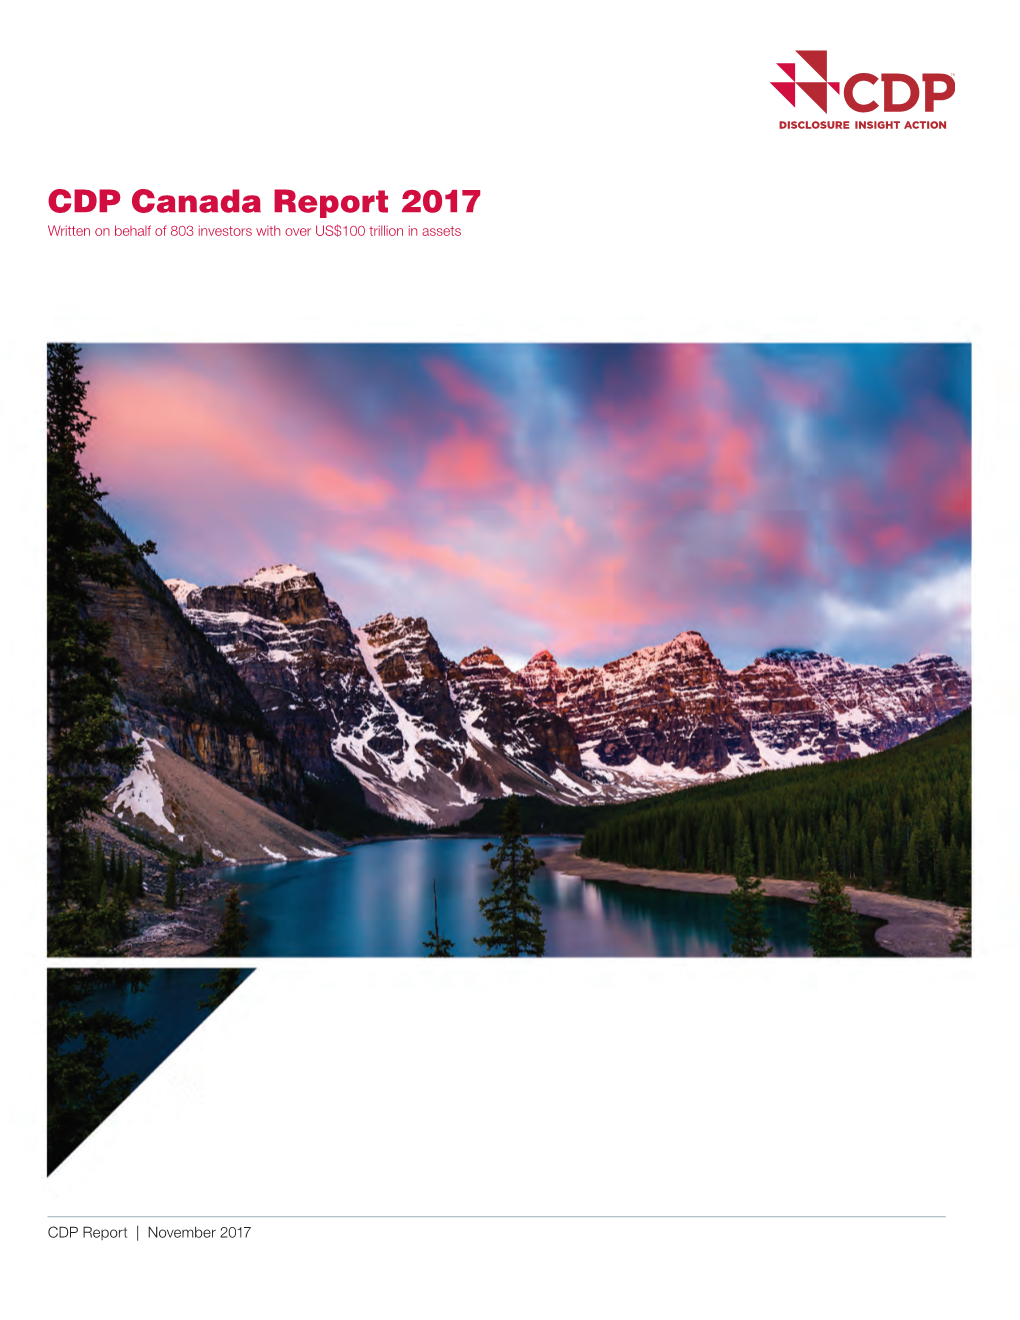 CDP Canada Report 2017 Written on Behalf of 803 Investors with Over US$100 Trillion in Assets